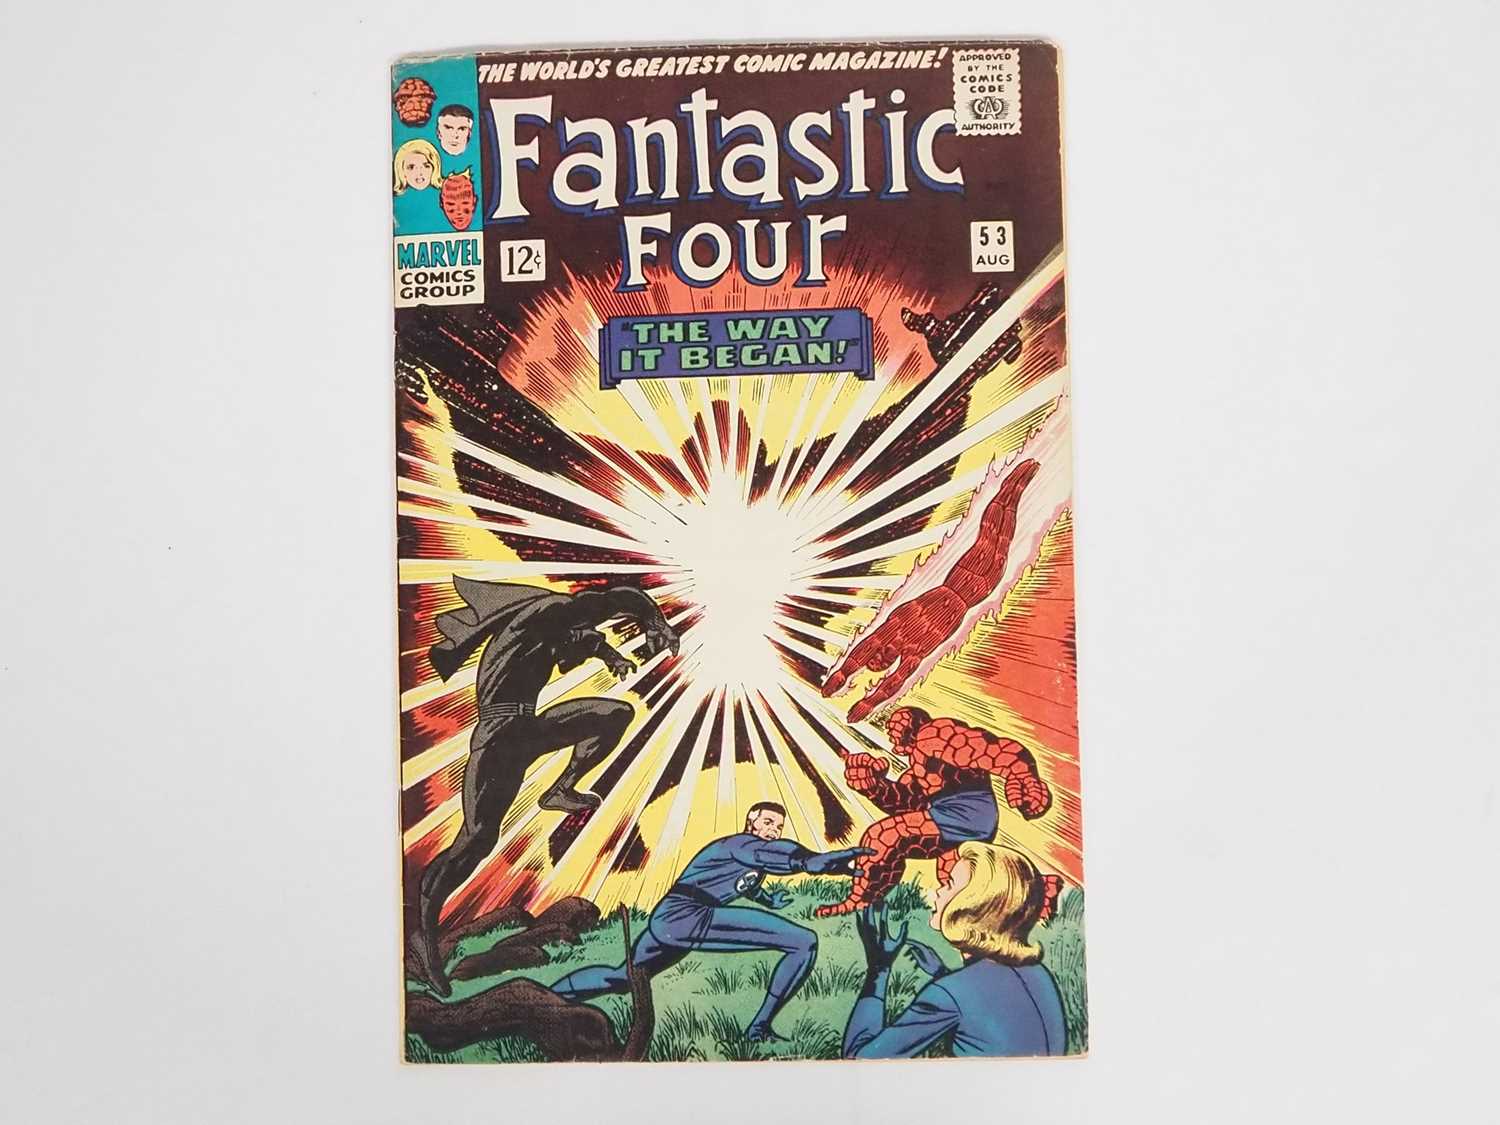 FANTASTIC FOUR #53 (1966 - MARVEL) - First appearance and origin of Klaw, the second appearance